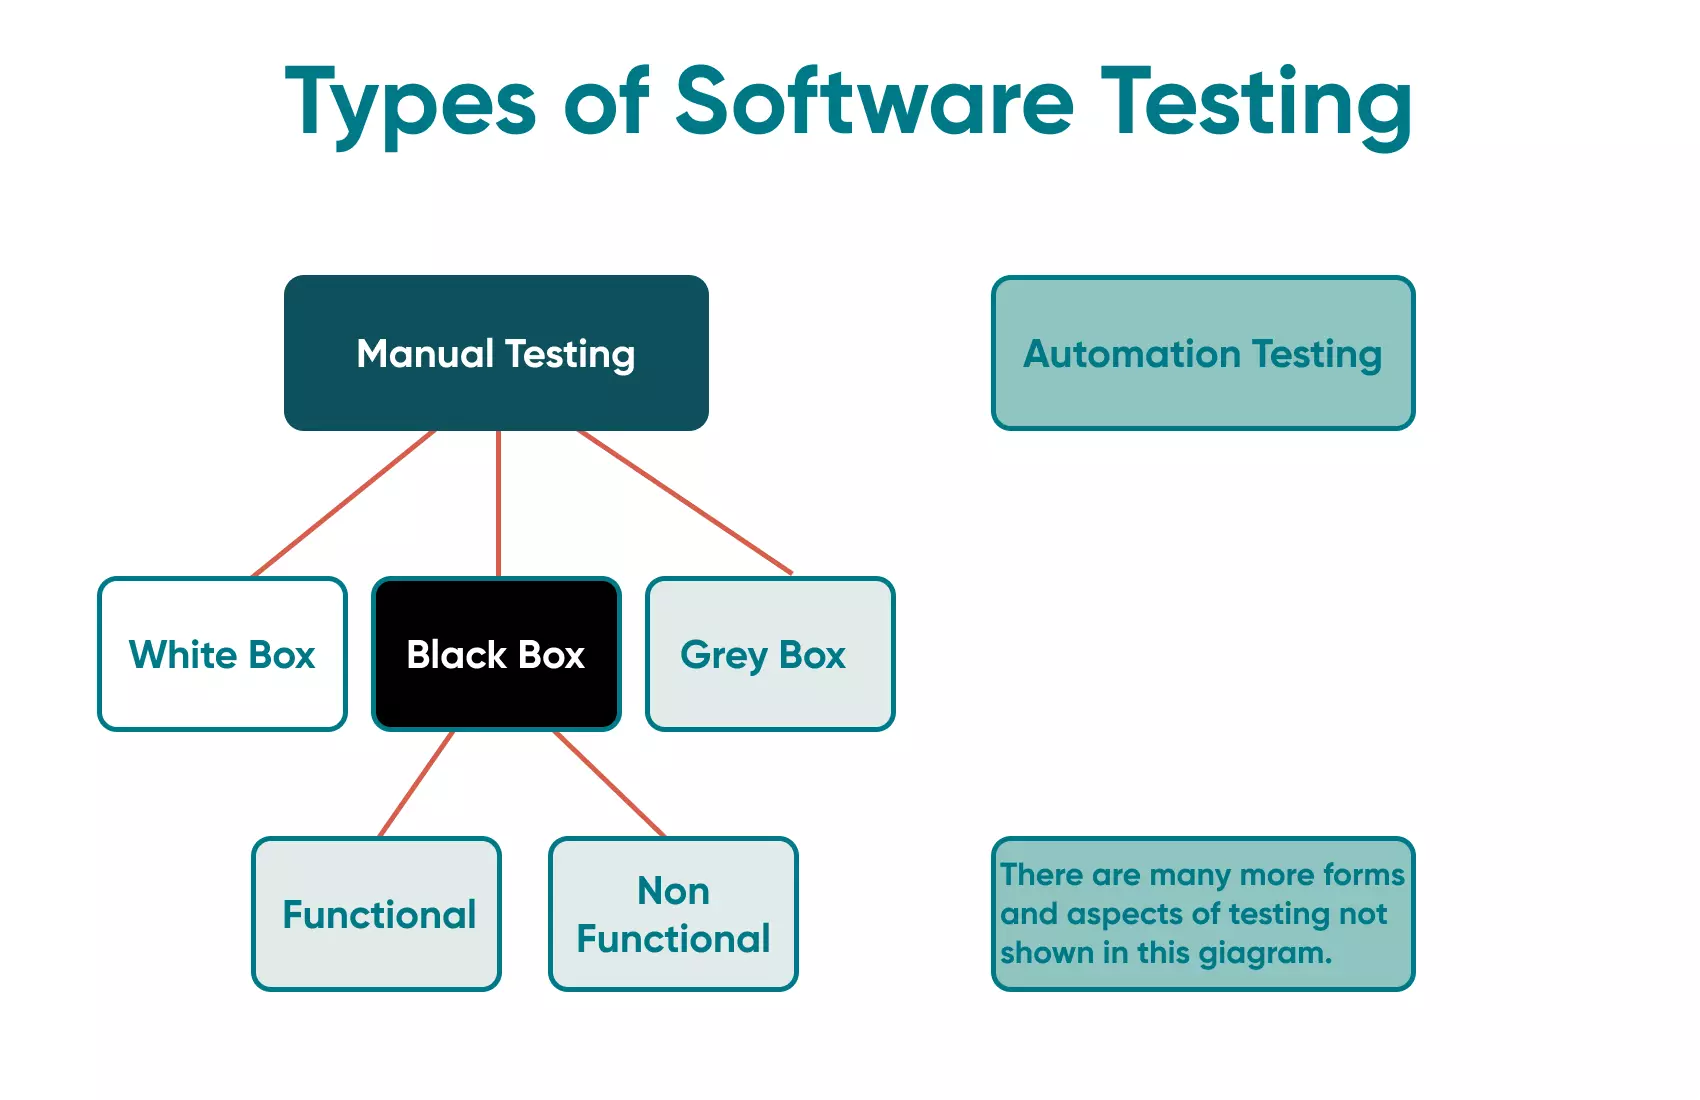 There are many types of quality assurance and control testing. The process of testing is broken down into many aspects depending on the project.